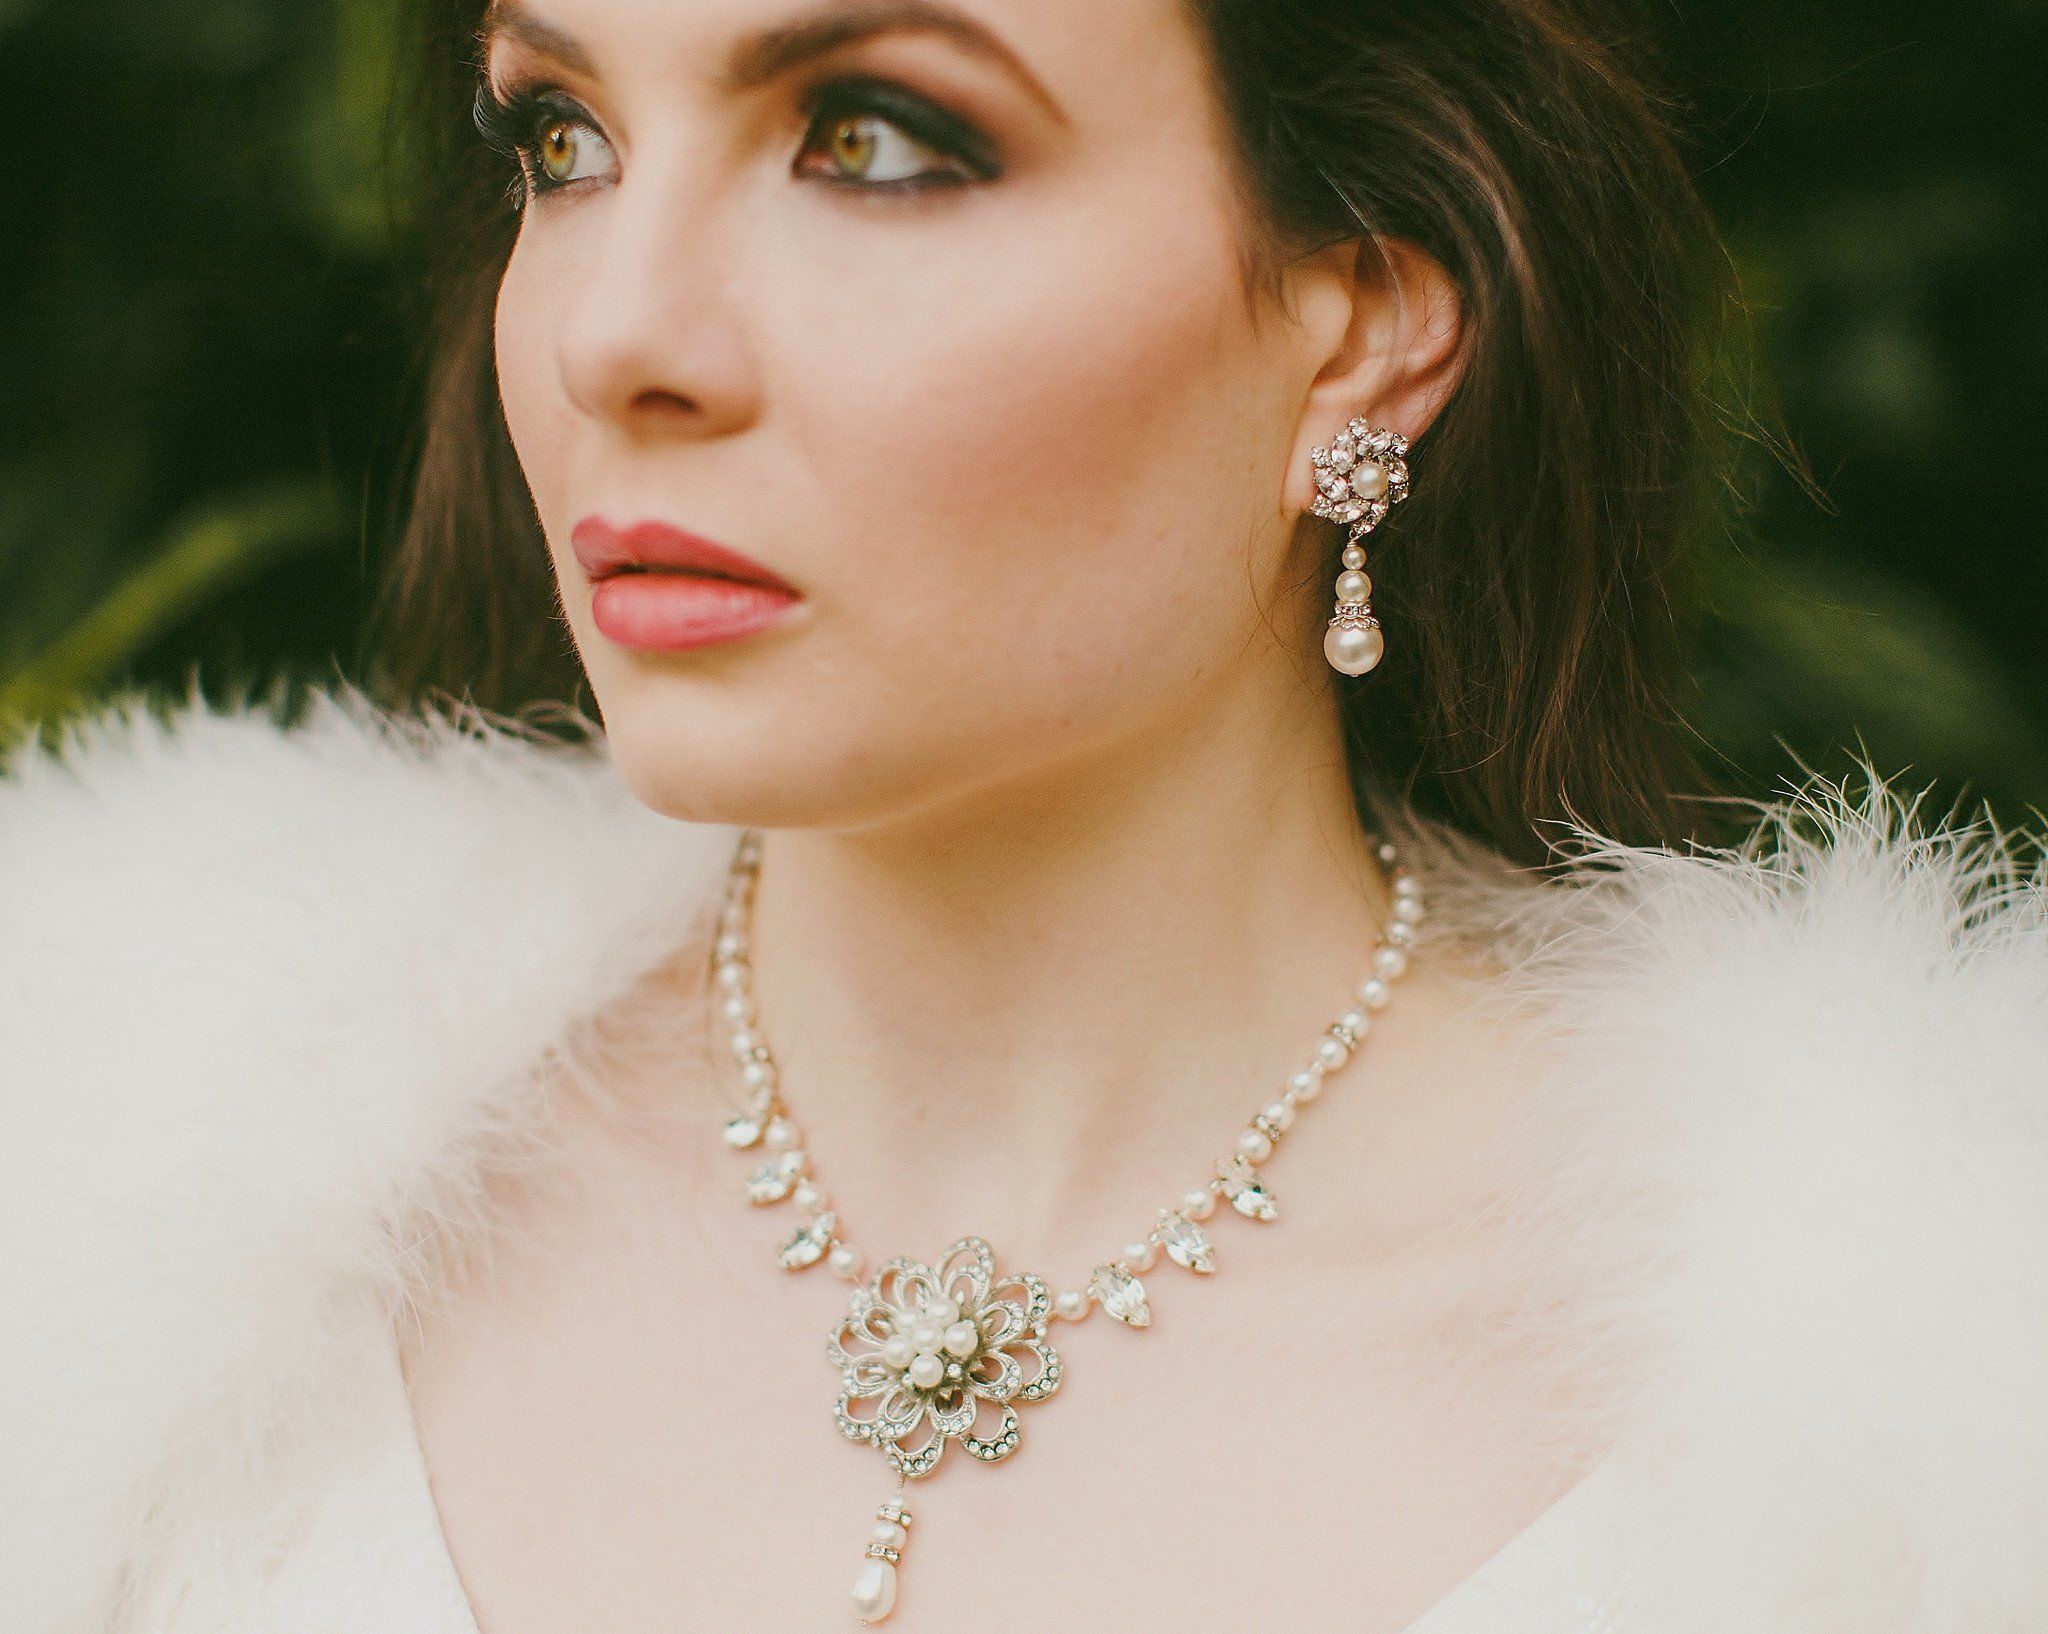 Vintage Styled Flower Necklace, Bridal Pearl Necklace, Danielle [Archival- Handmade]